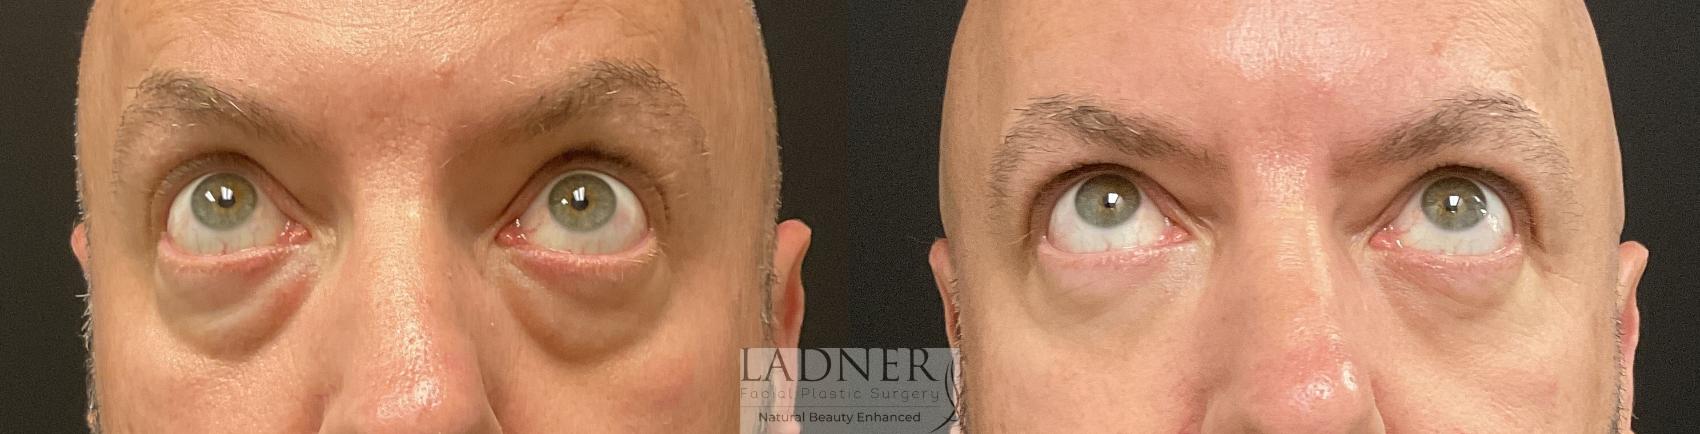 Eyelid Surgery (blepharoplasty) Case 229 Before & After Front Looking Up  | Denver, CO | Ladner Facial Plastic Surgery